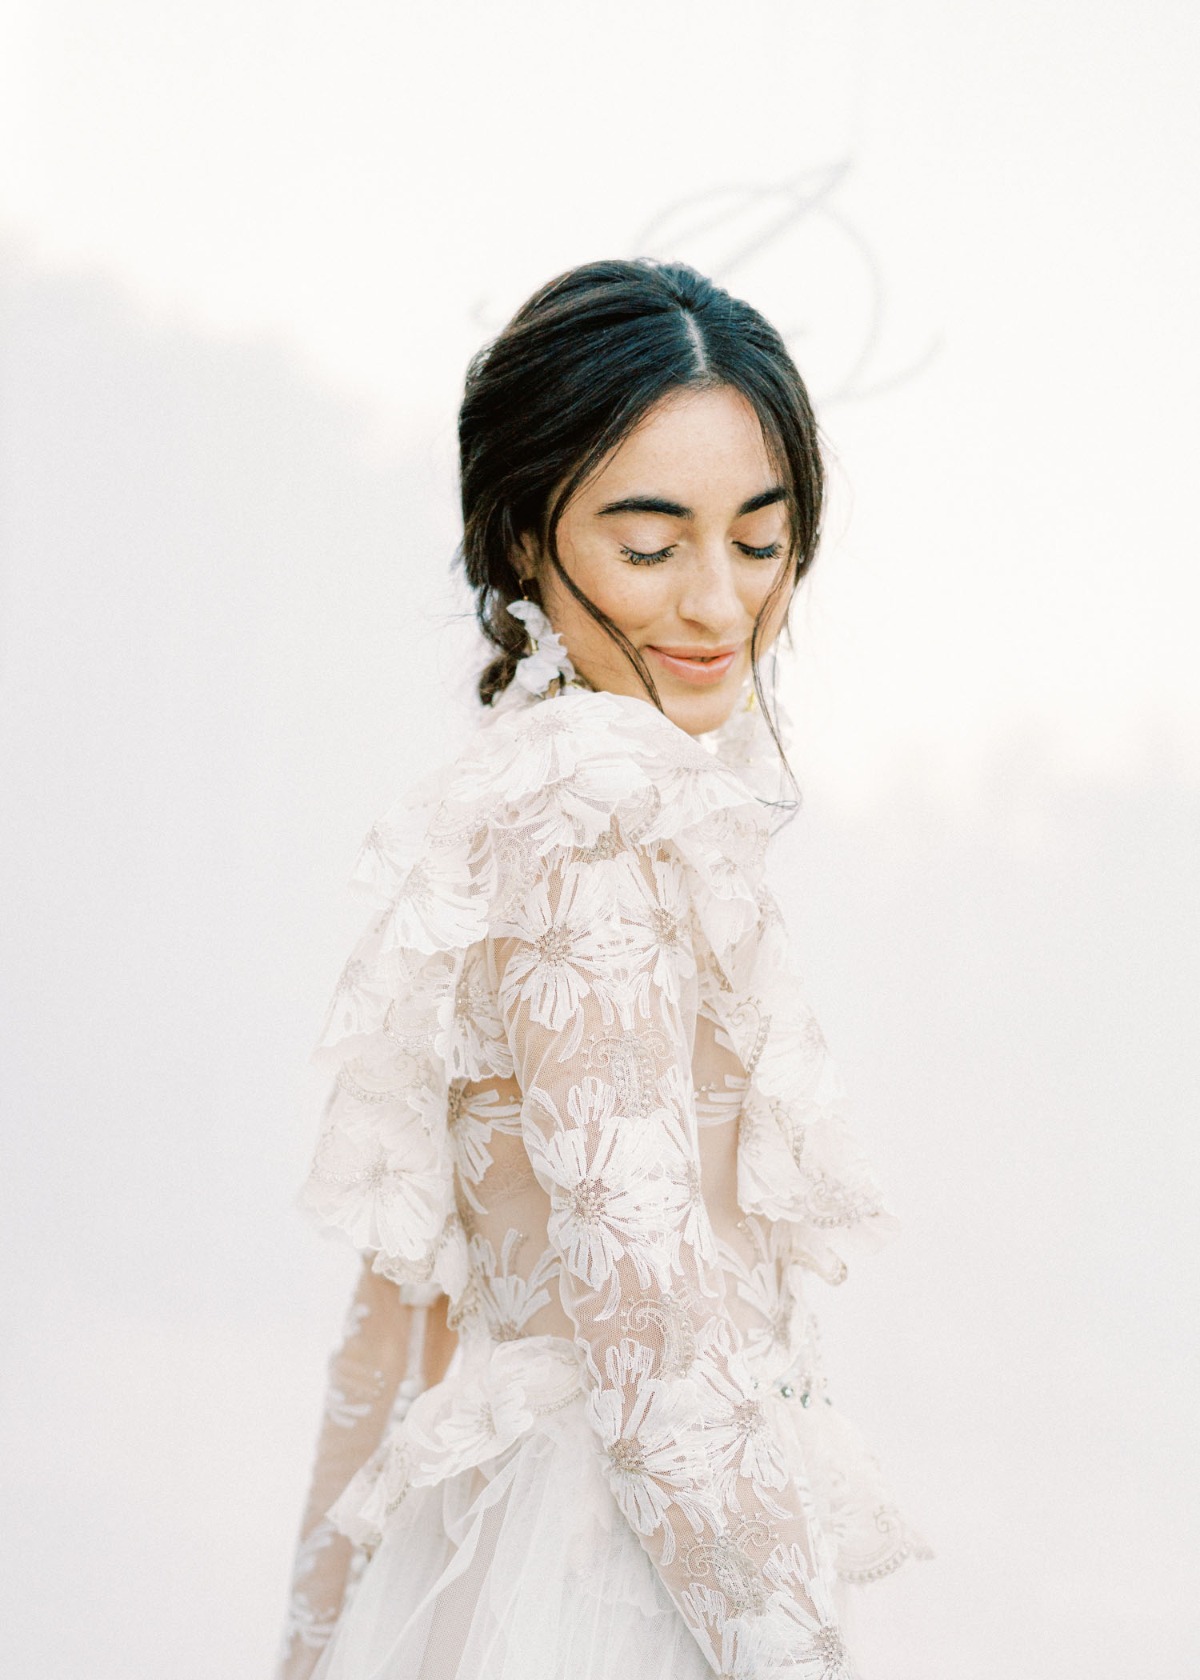 Endless ruffles and Apulian charm in this Italian celebration in purest white